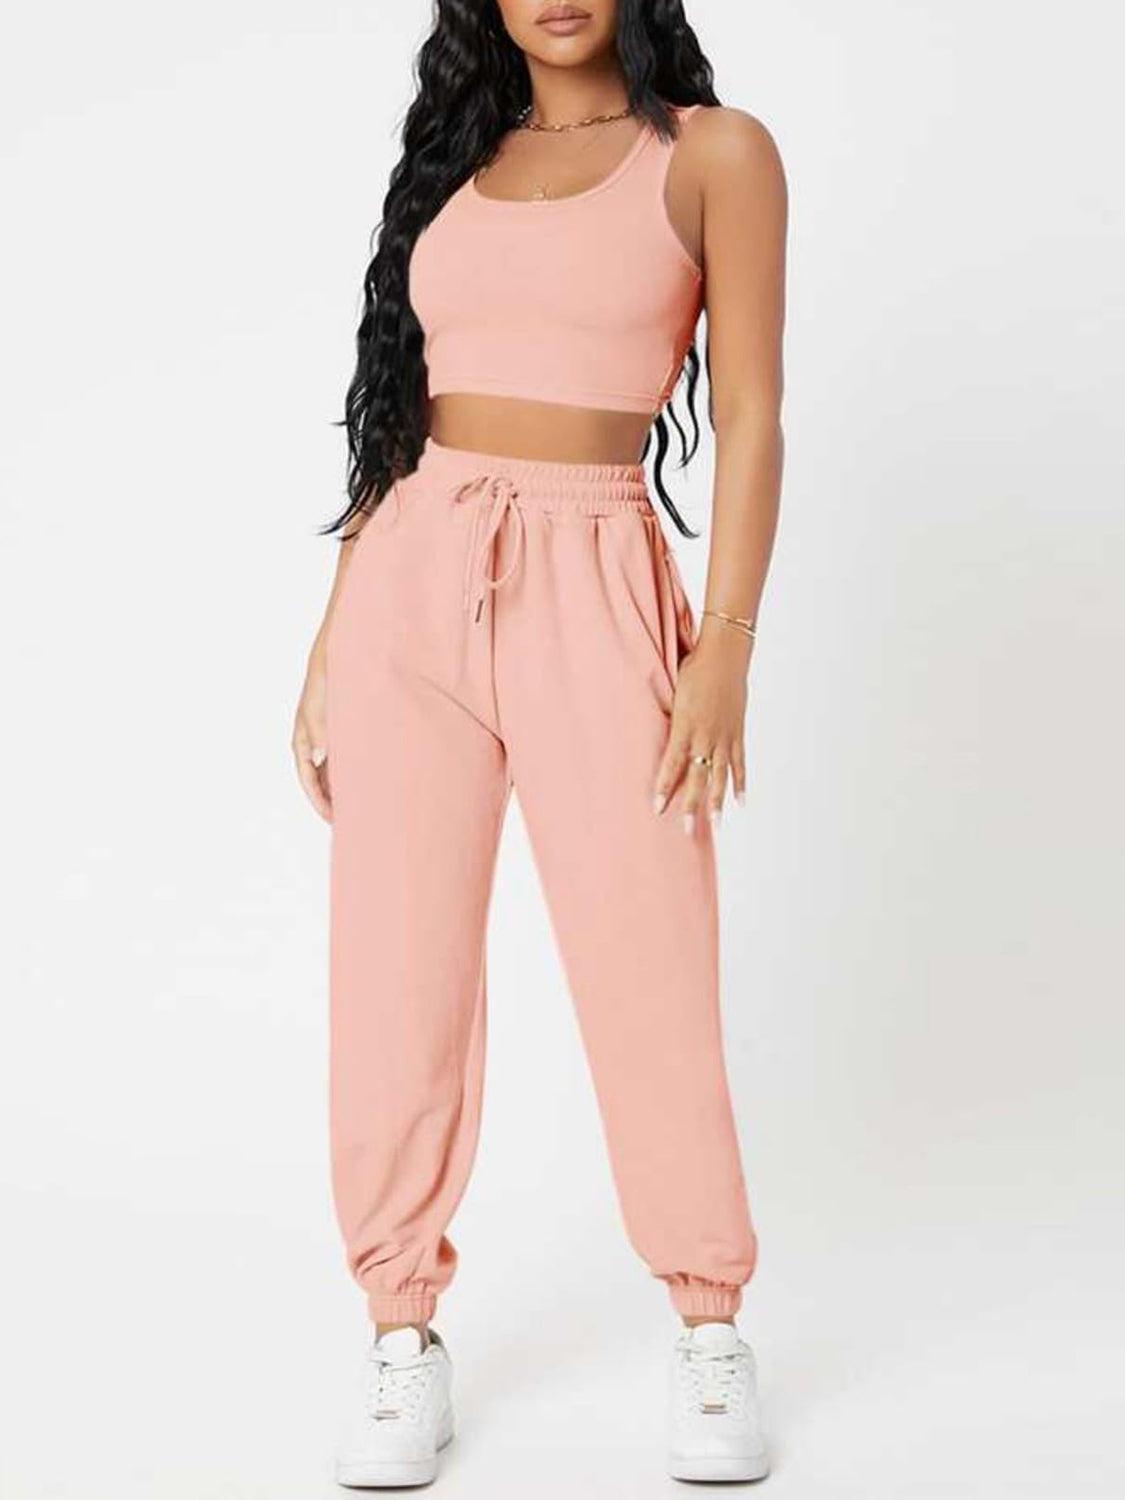 a woman wearing a pink crop top and sweat pants